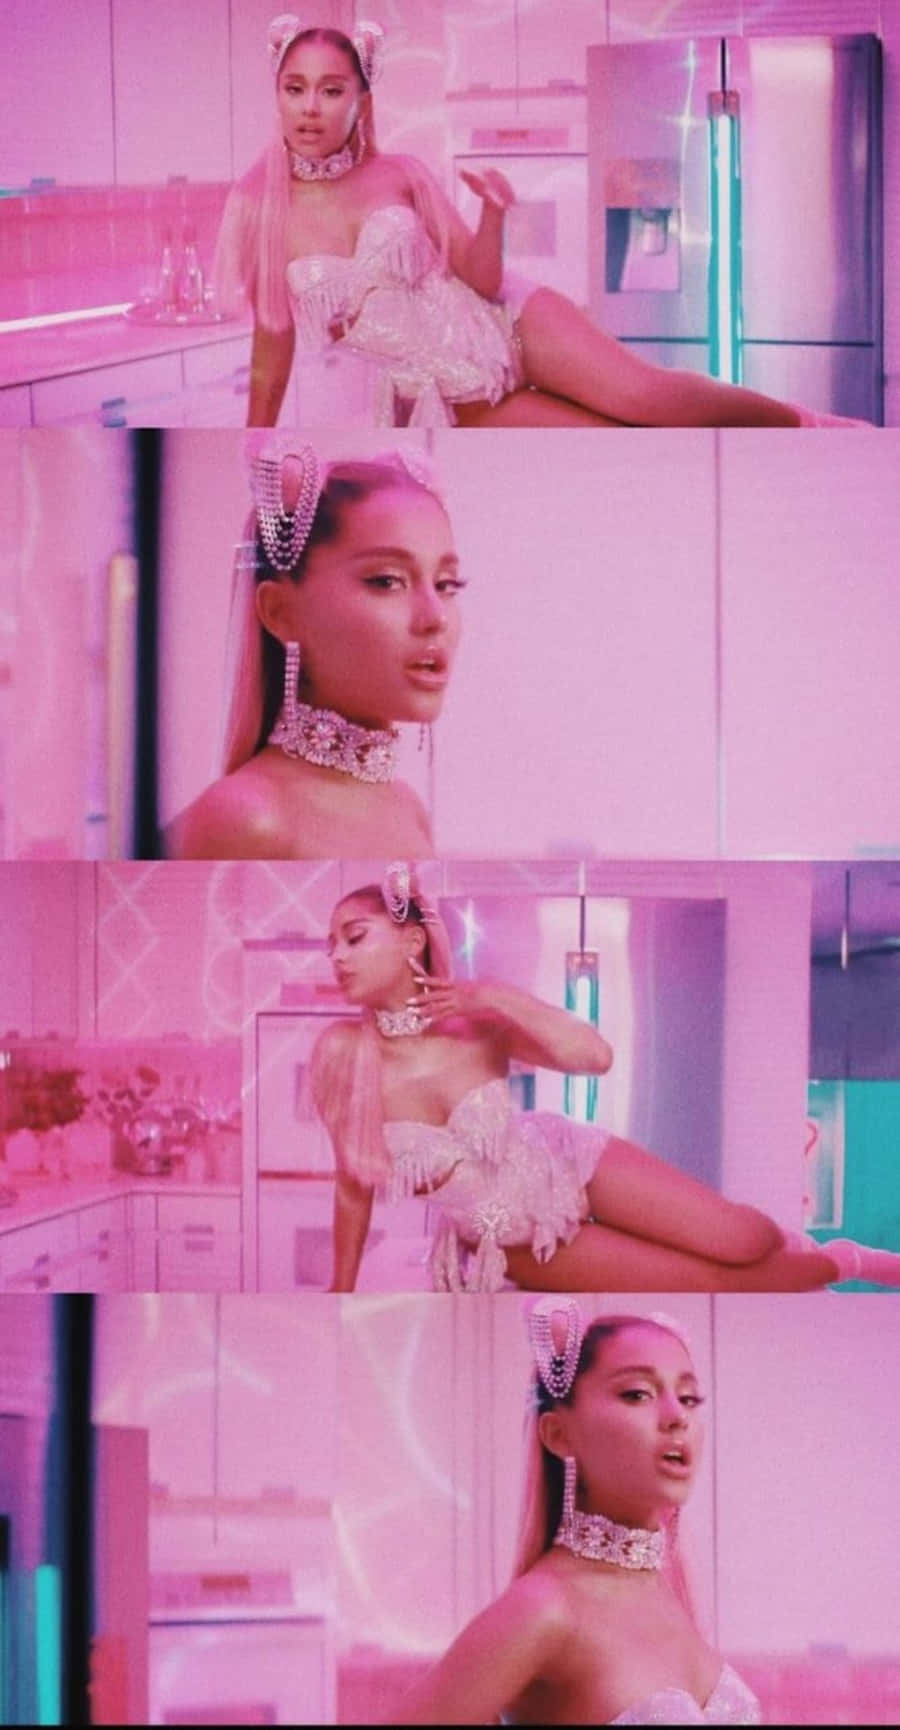 Rosa Ariana Grande 7 Rings (this Would Be A Possible Translation, As The Sentence Itself Doesn't Provide Much Context About What It Is Referring To, So I Assume It Is Just The Name Of A Wallpaper Or The Title Of A Design) Wallpaper